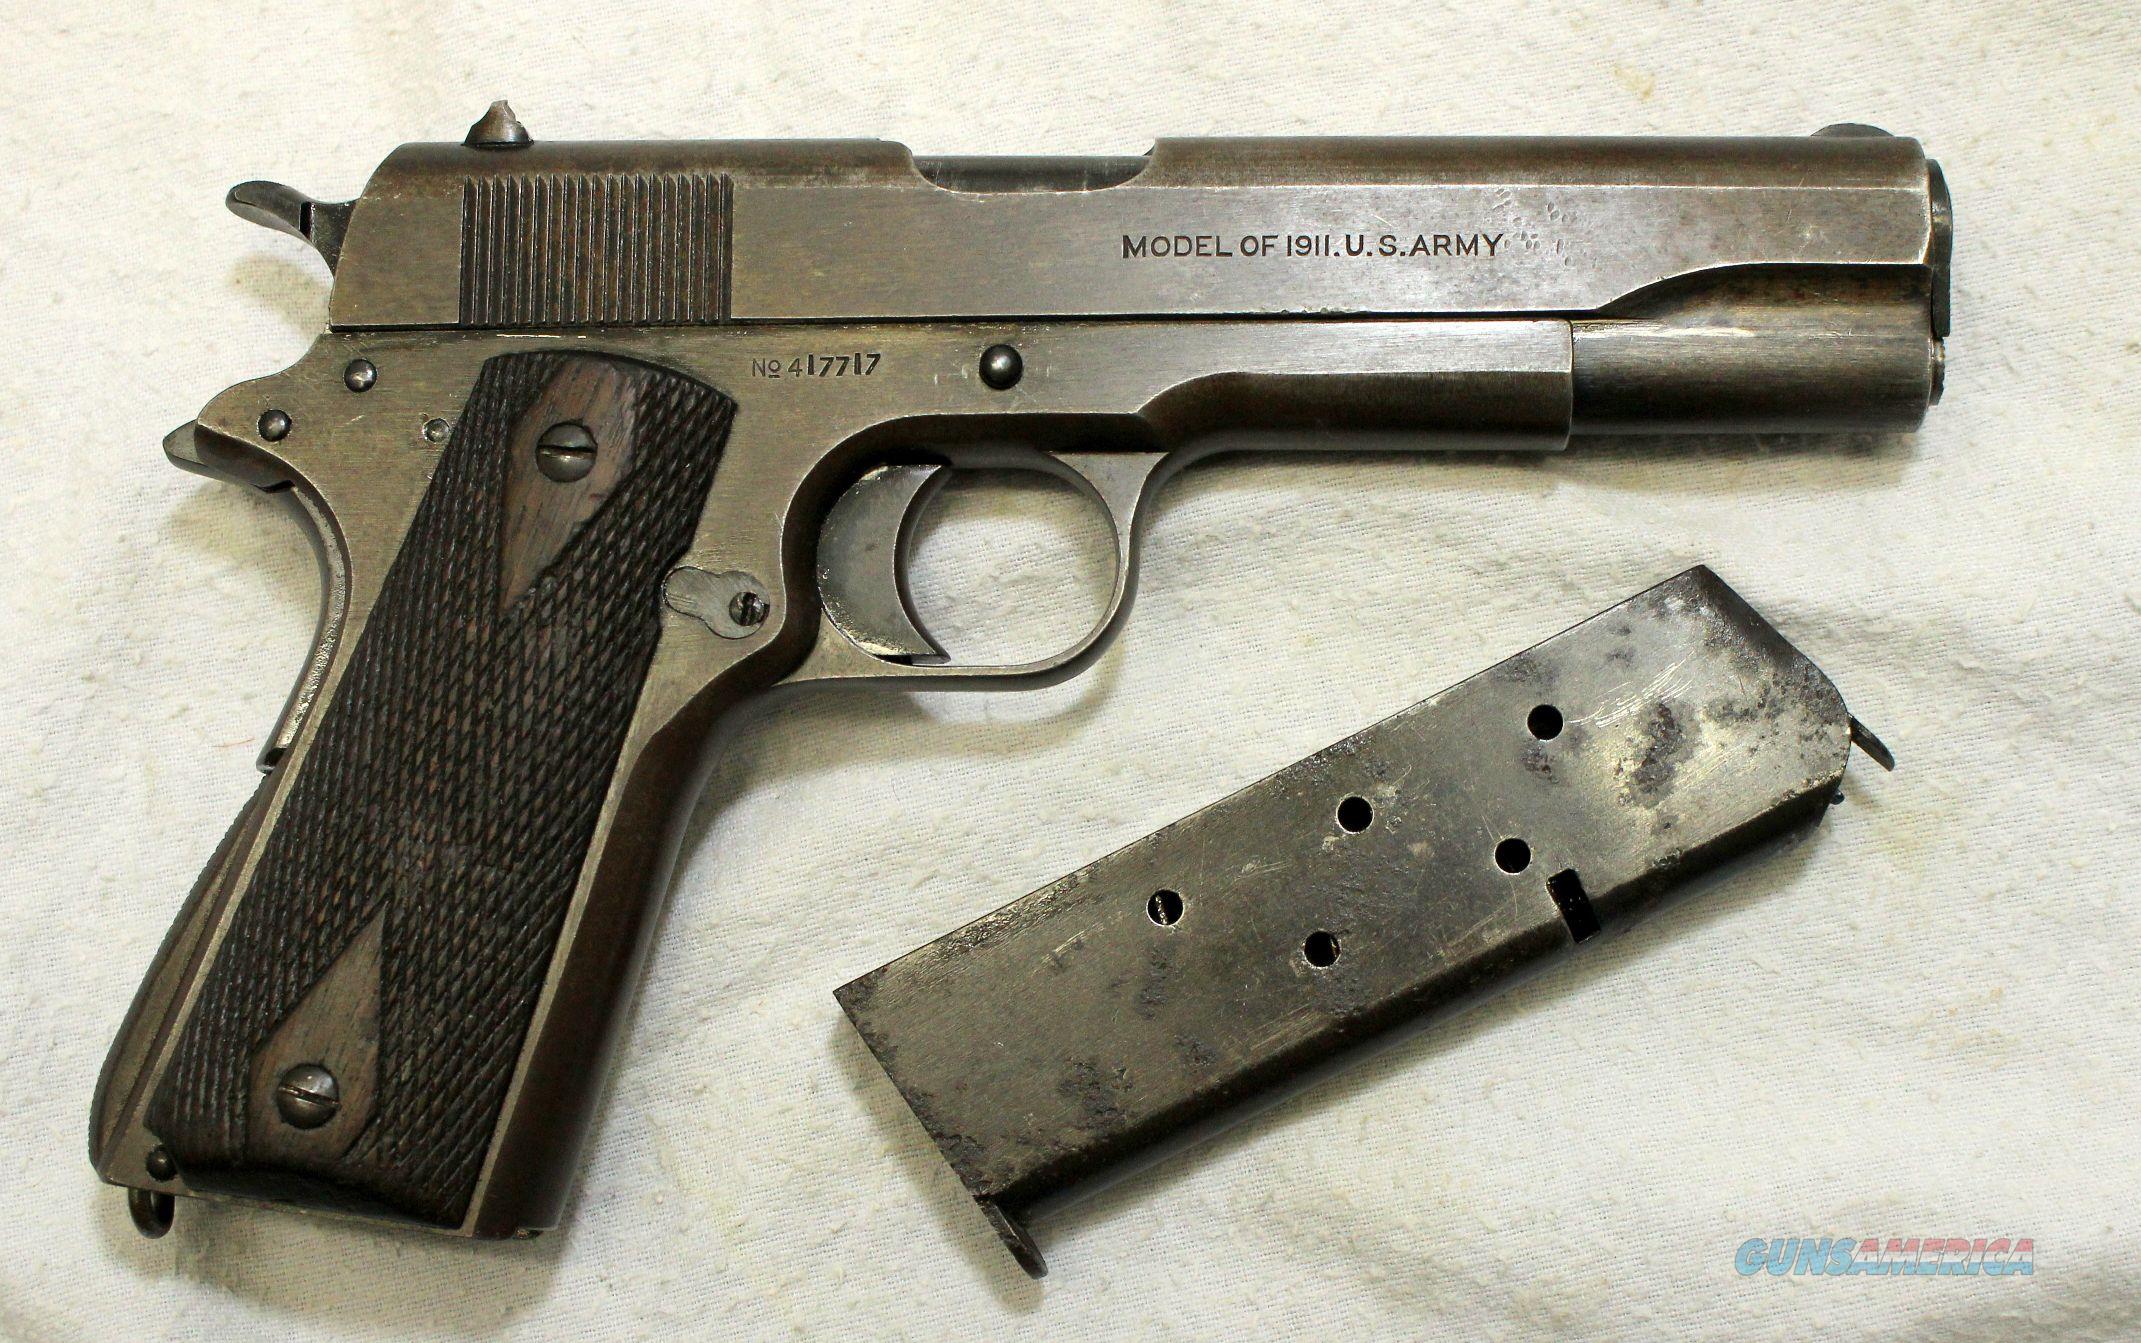 Colt 1911 Wwi Military Issue Pistol For Sale At 916321456 3493